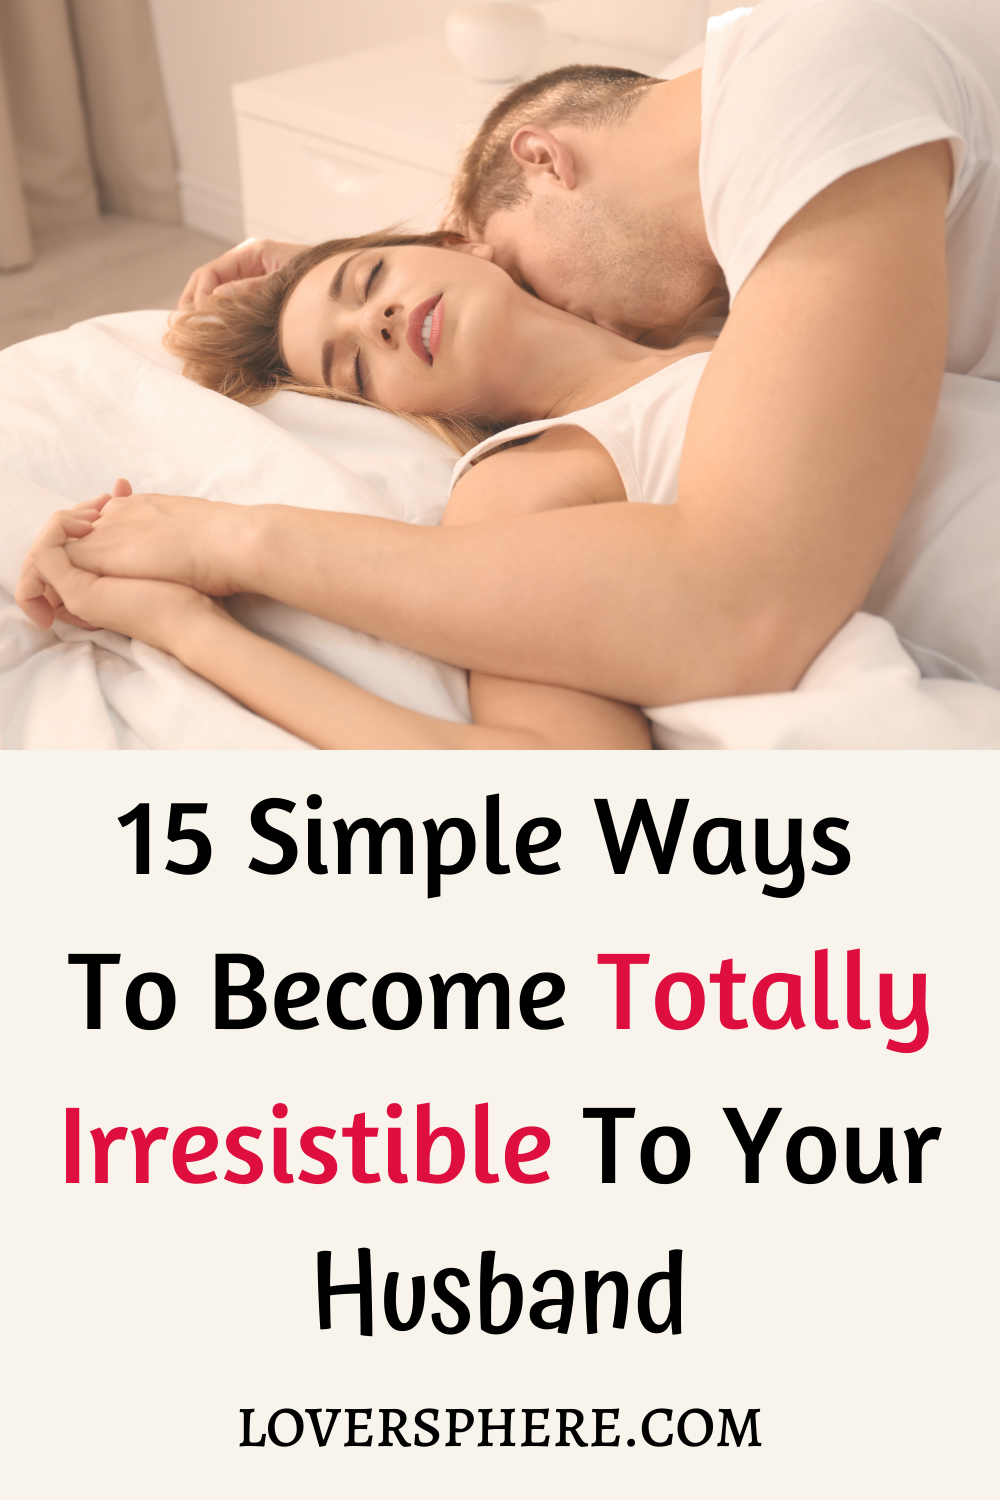 Ways To Become Irresistible To Your Husband